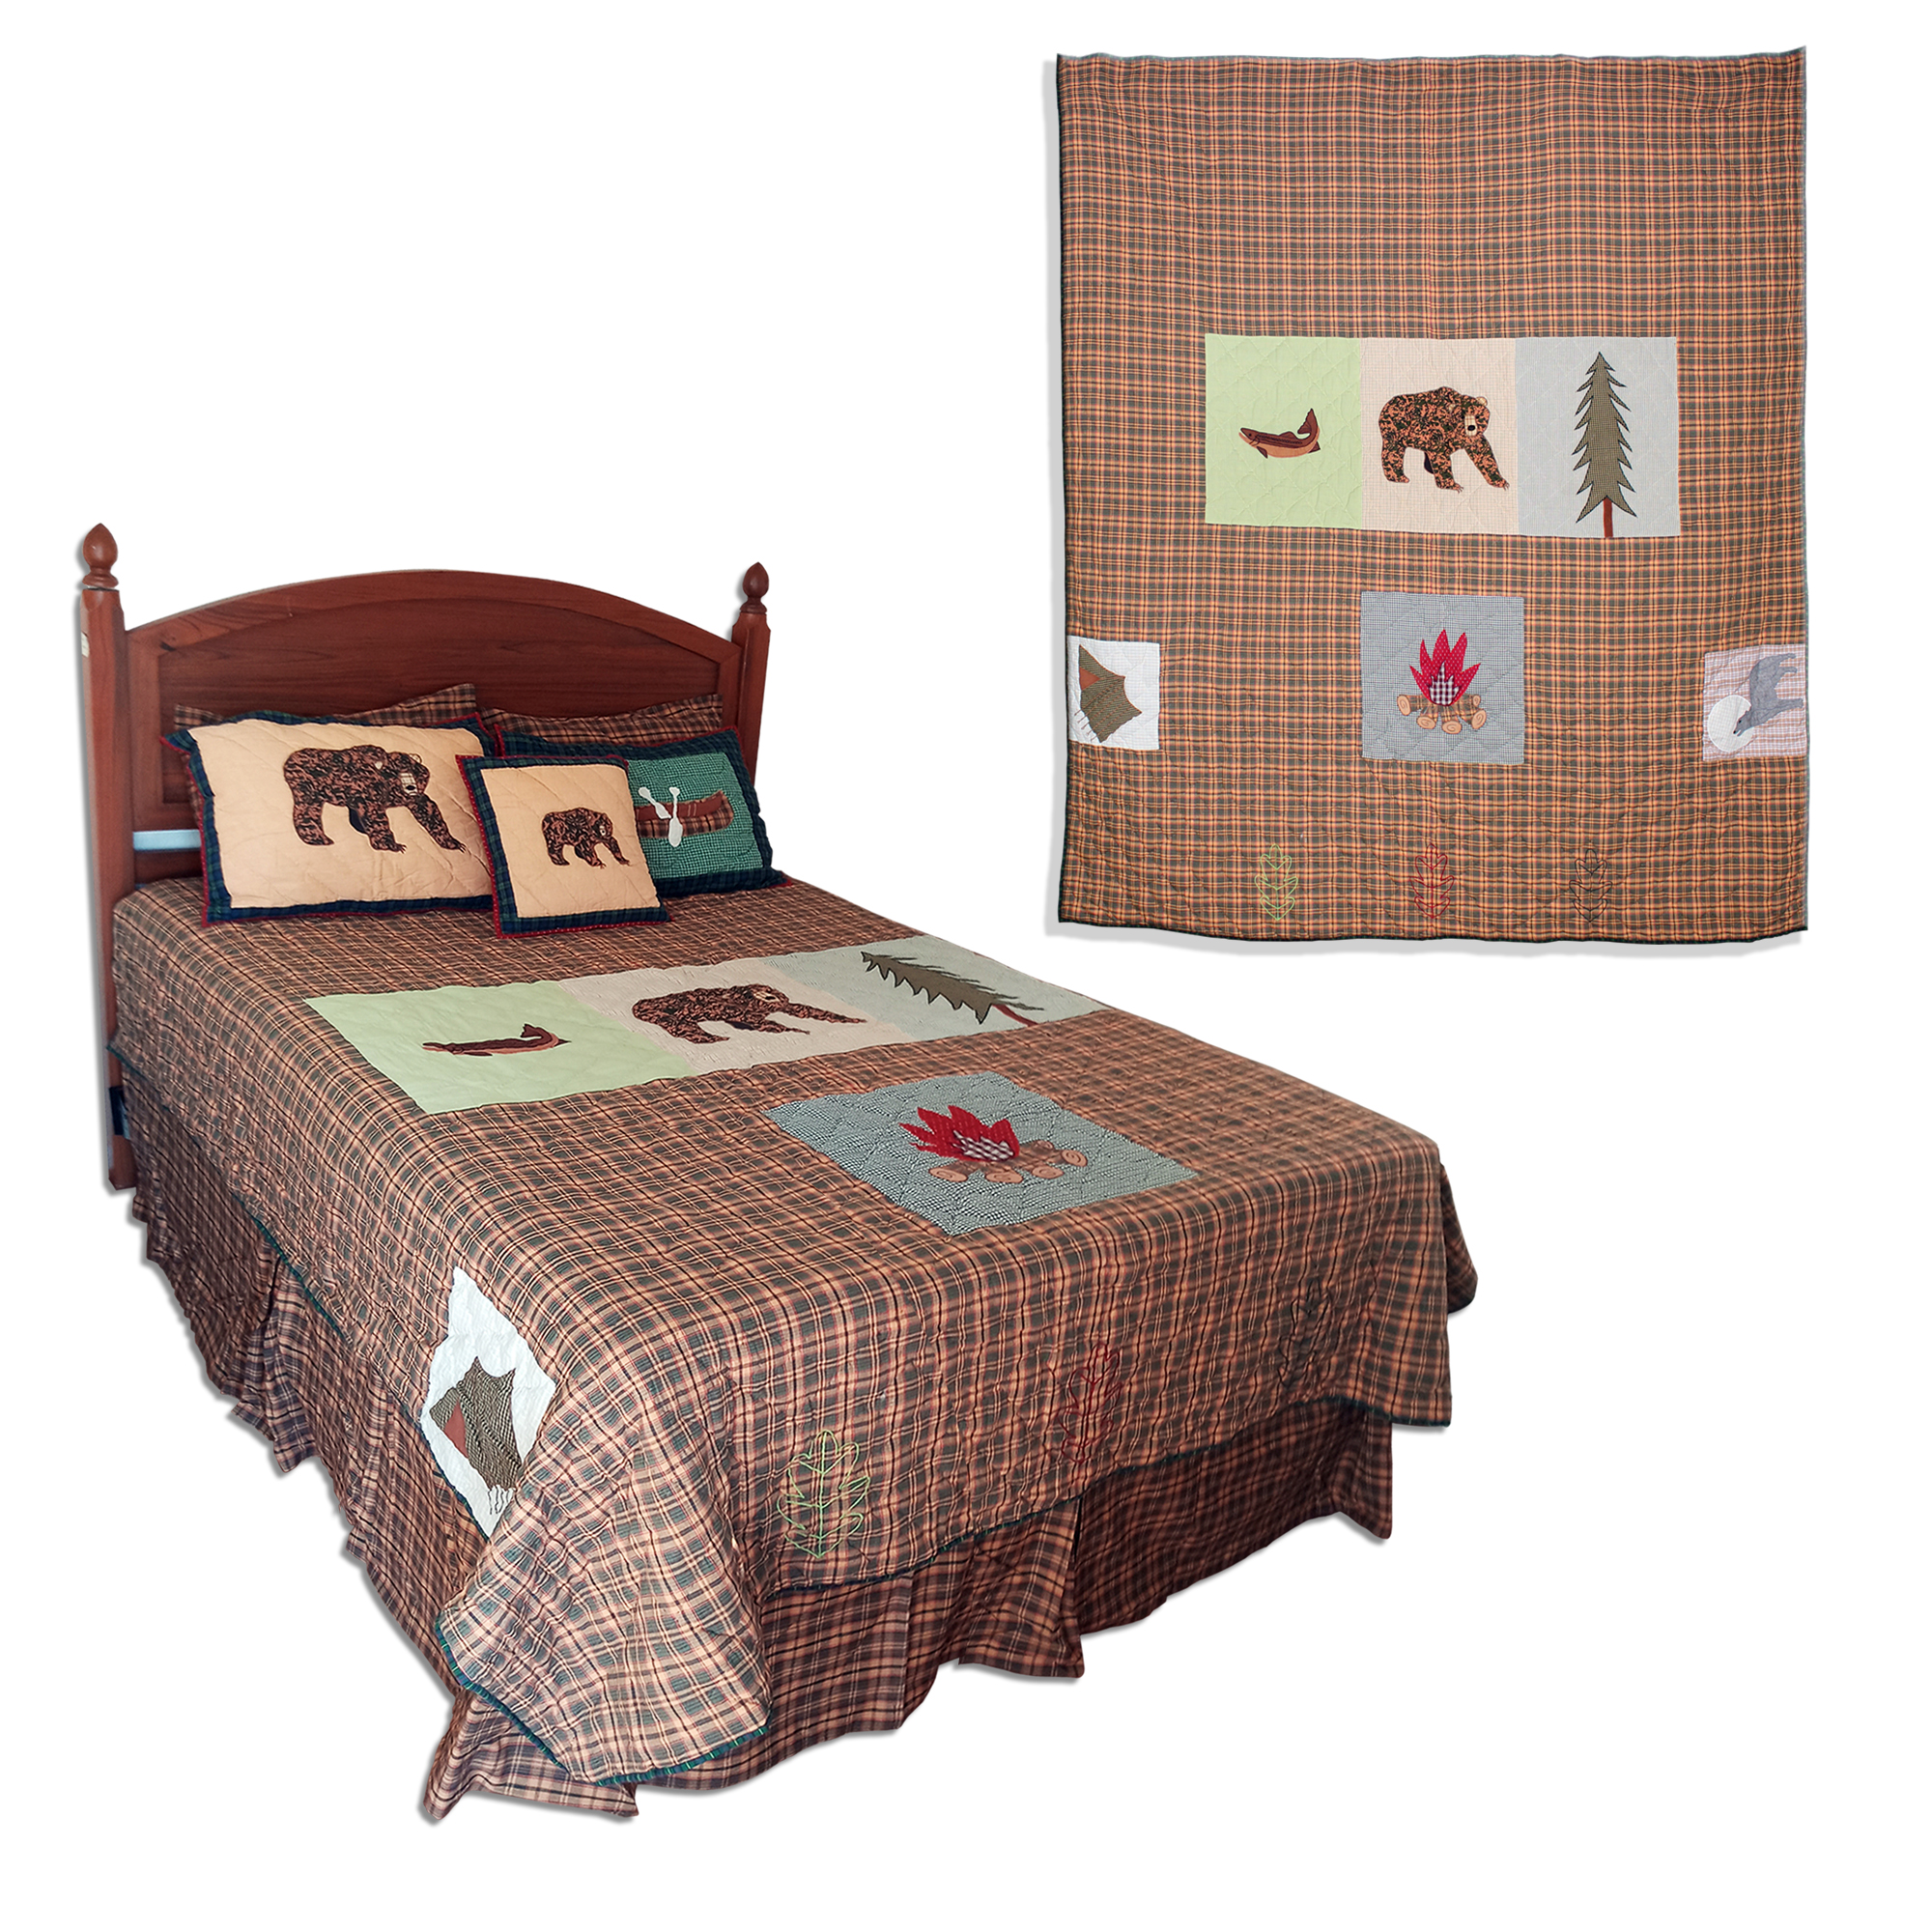 Backwoods Trek, Gold and Brown Plaid Twin Quilt 65"W x 85"L